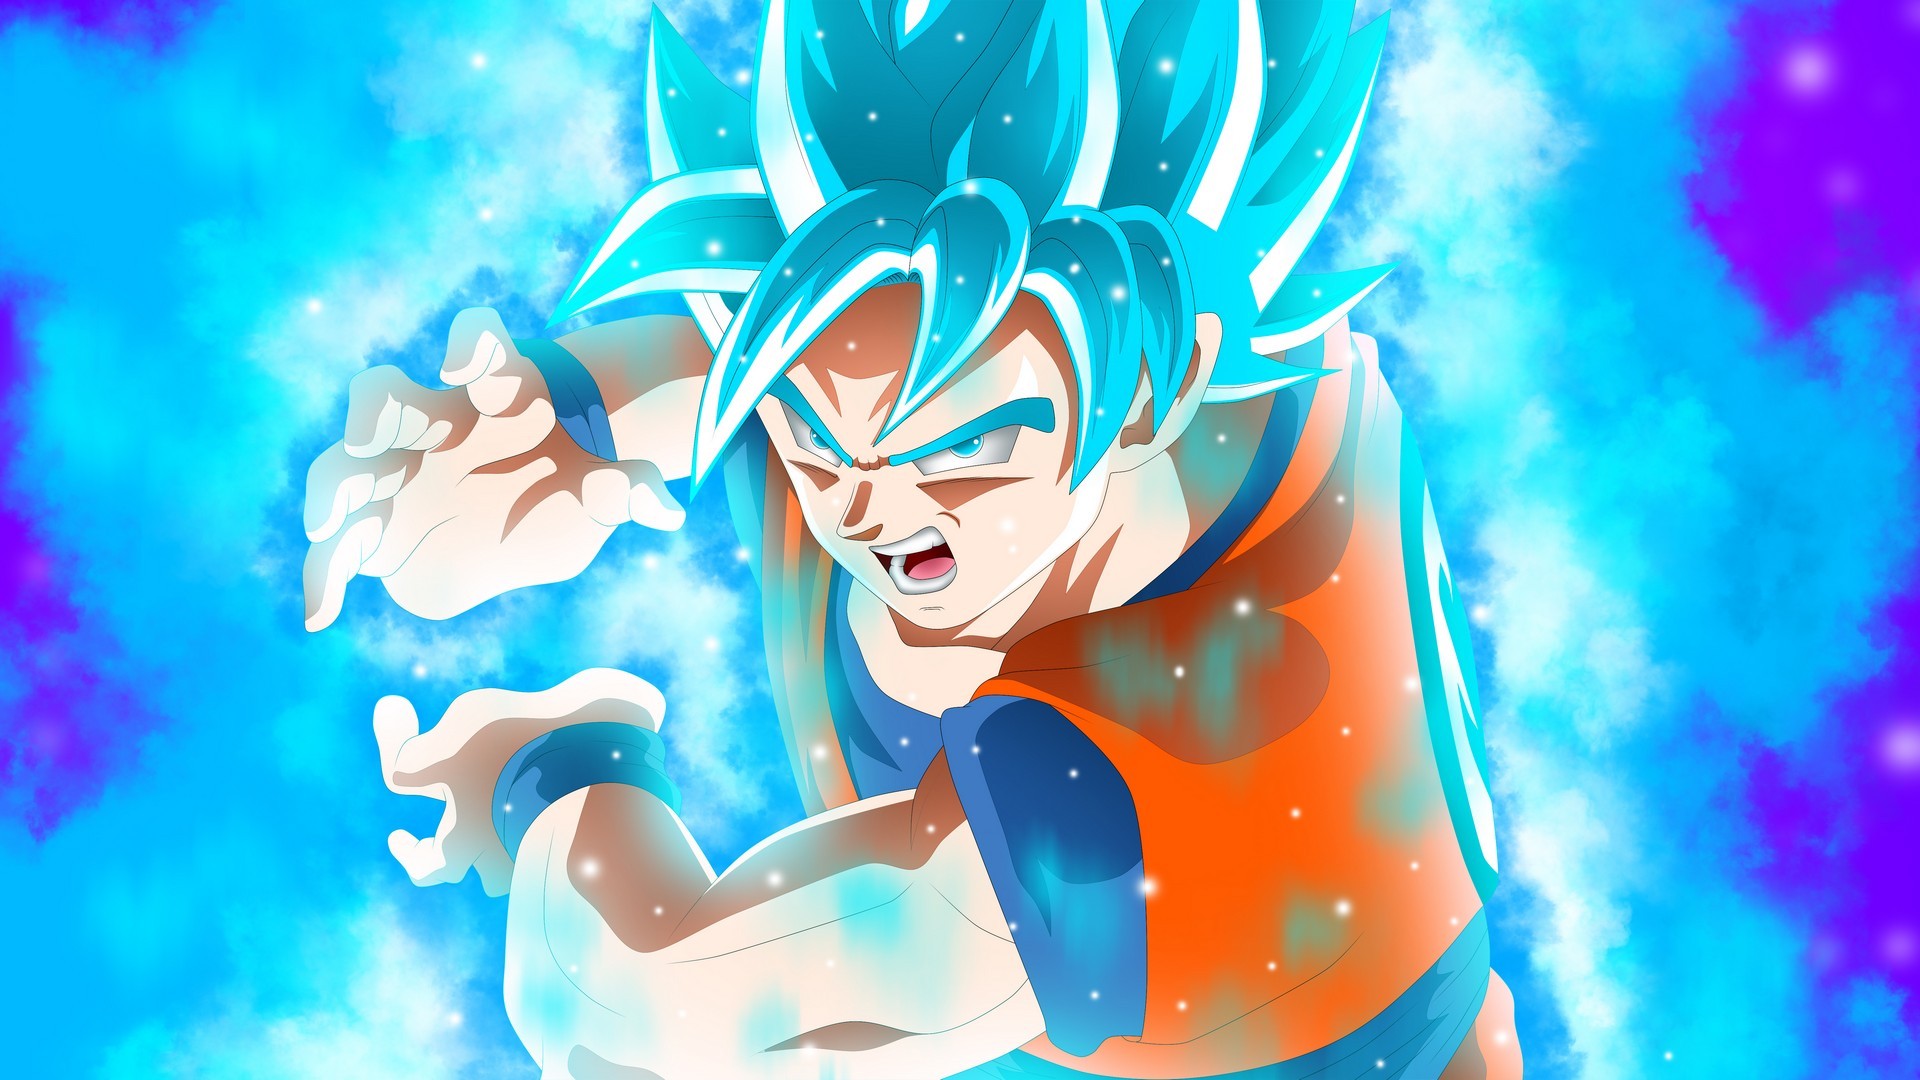 Wallpaper Goku SSJ Blue with image resolution 1920x1080 pixel. You can use this wallpaper as background for your desktop Computer Screensavers, Android or iPhone smartphones